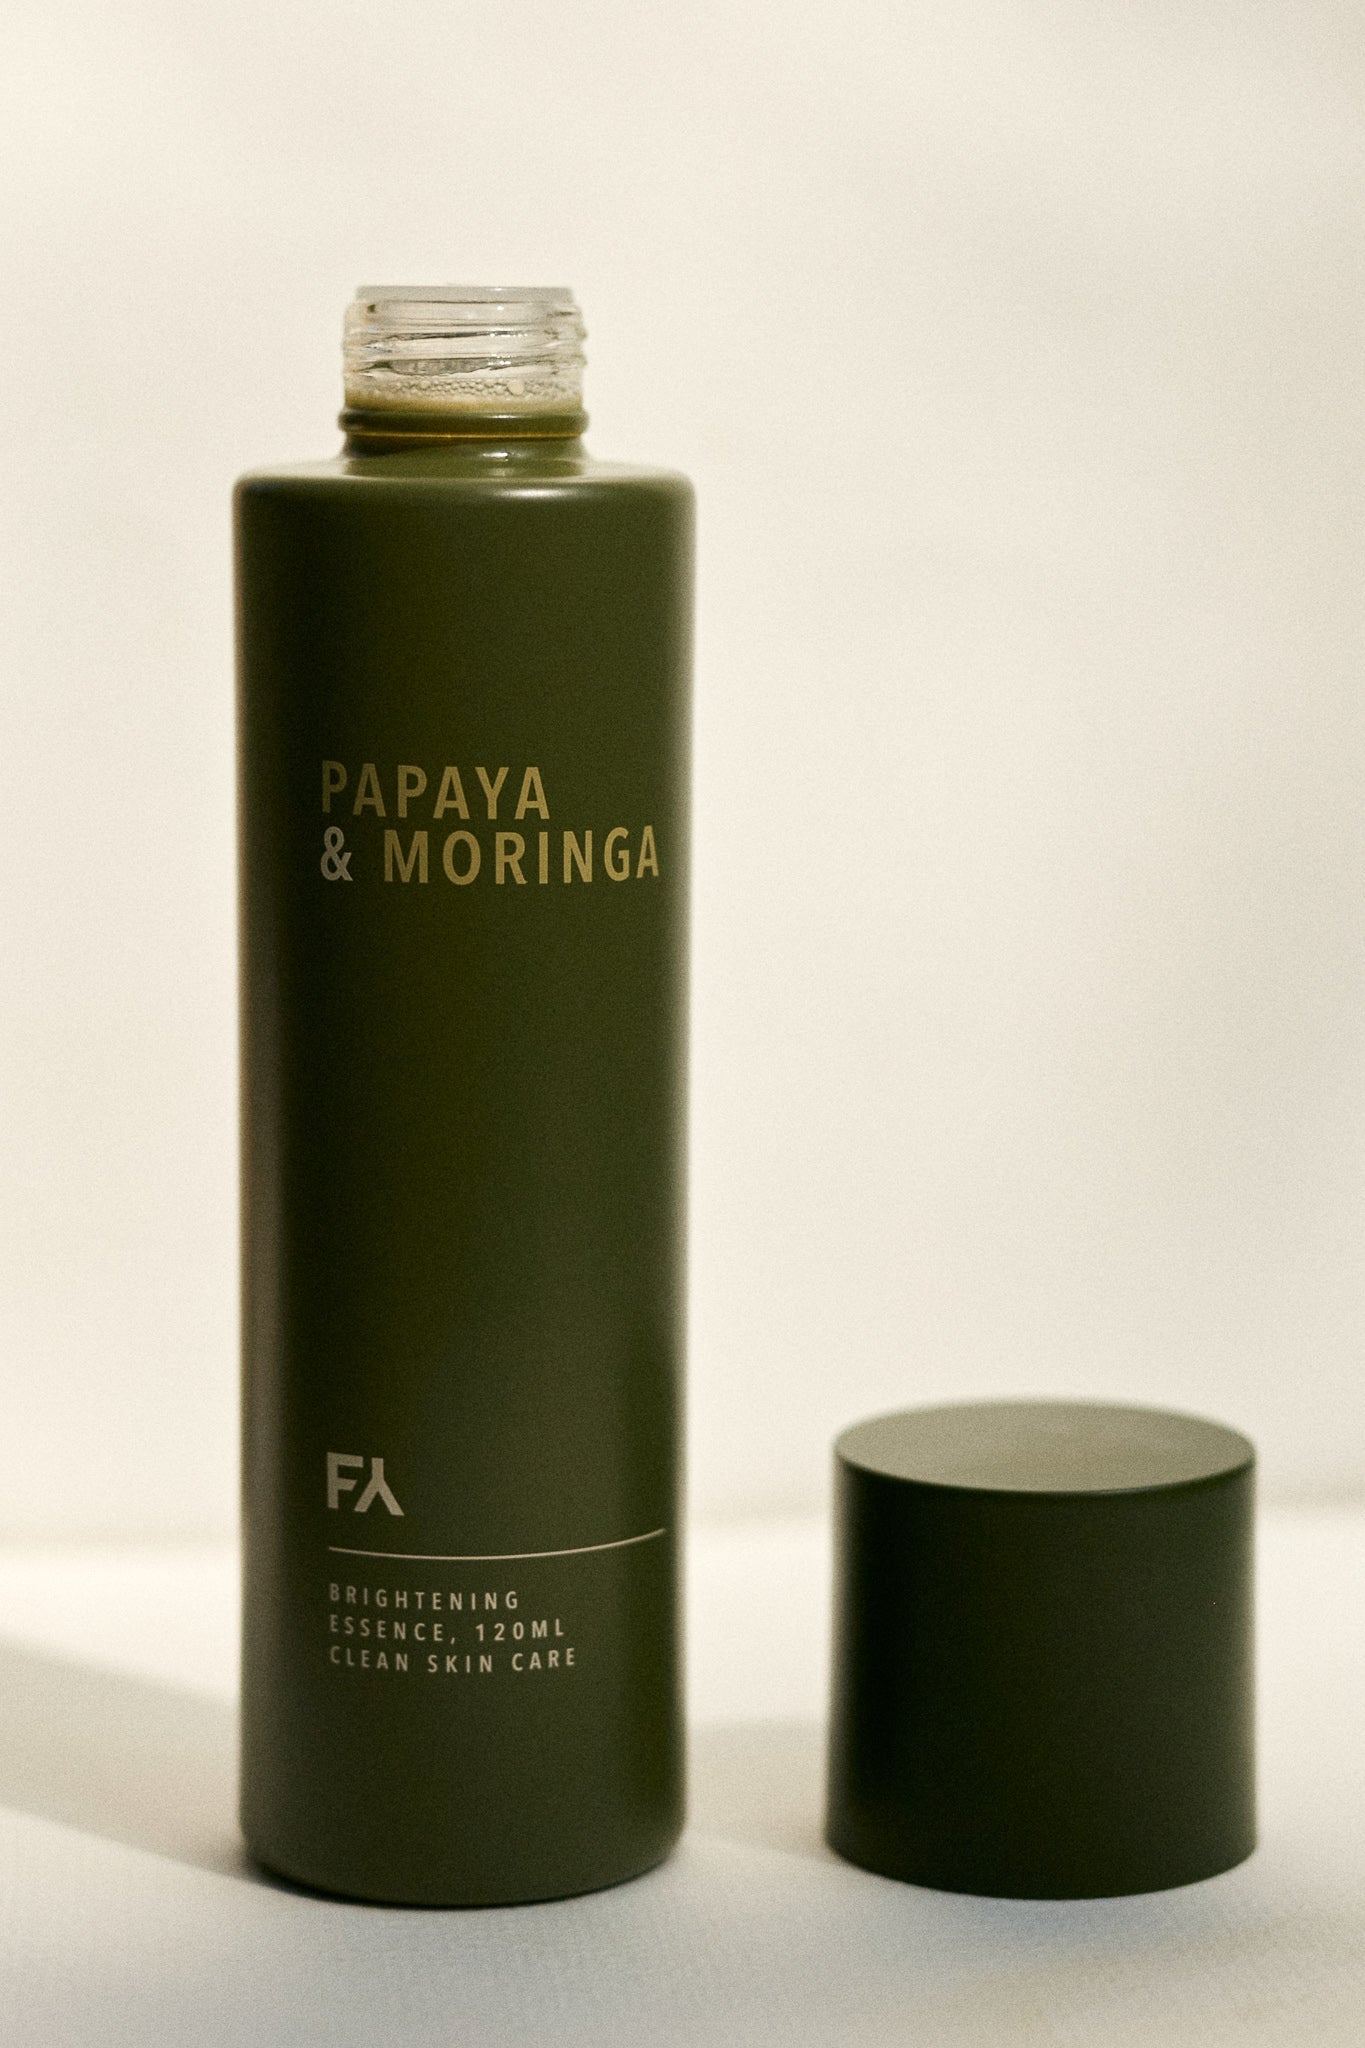 Campaign Shot showign the Papaya & Moringa Brightening Essence by Fields of Yarrow  with the opened lid